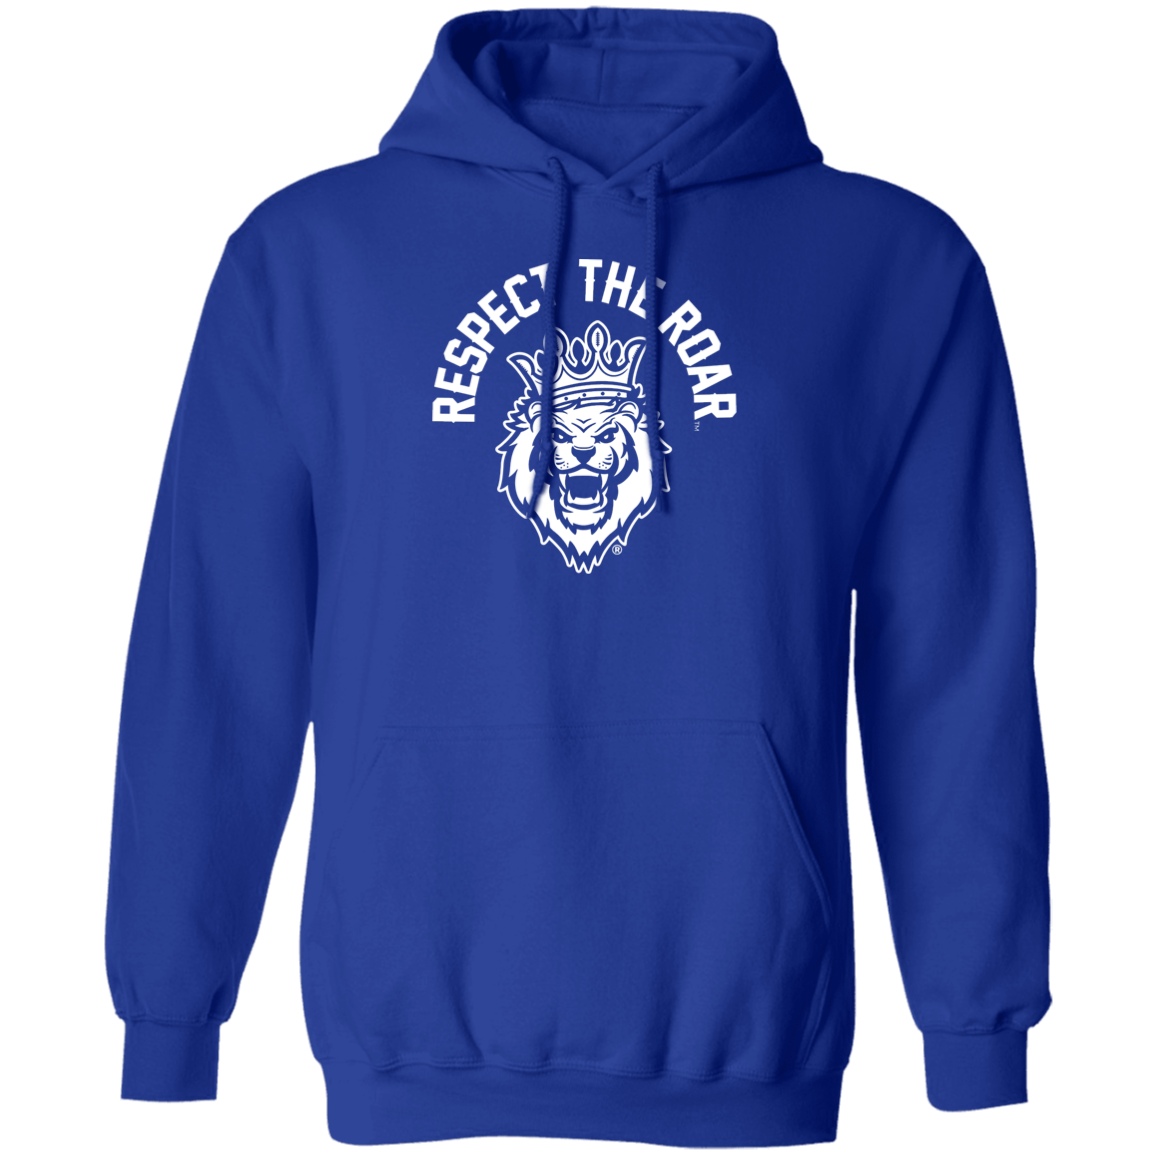 Respect The Roar - G185 Pullover Hoodie